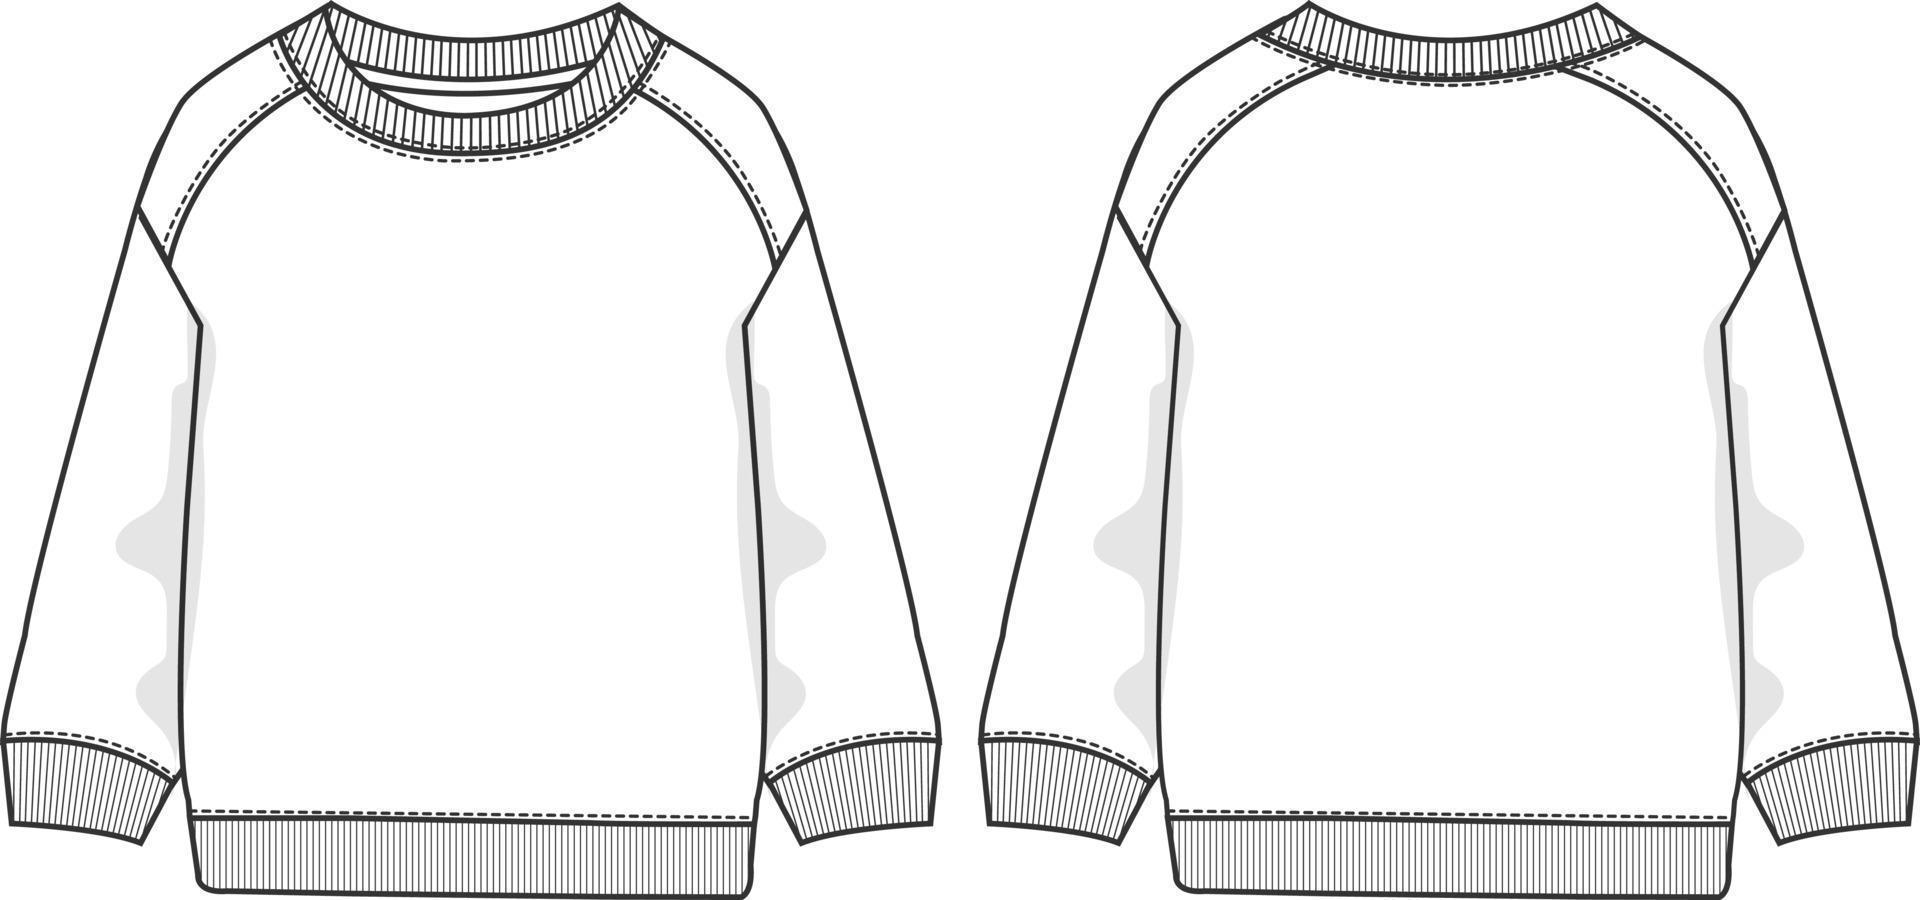 Sweatshirt fashion flat sketch vector template front and back views.